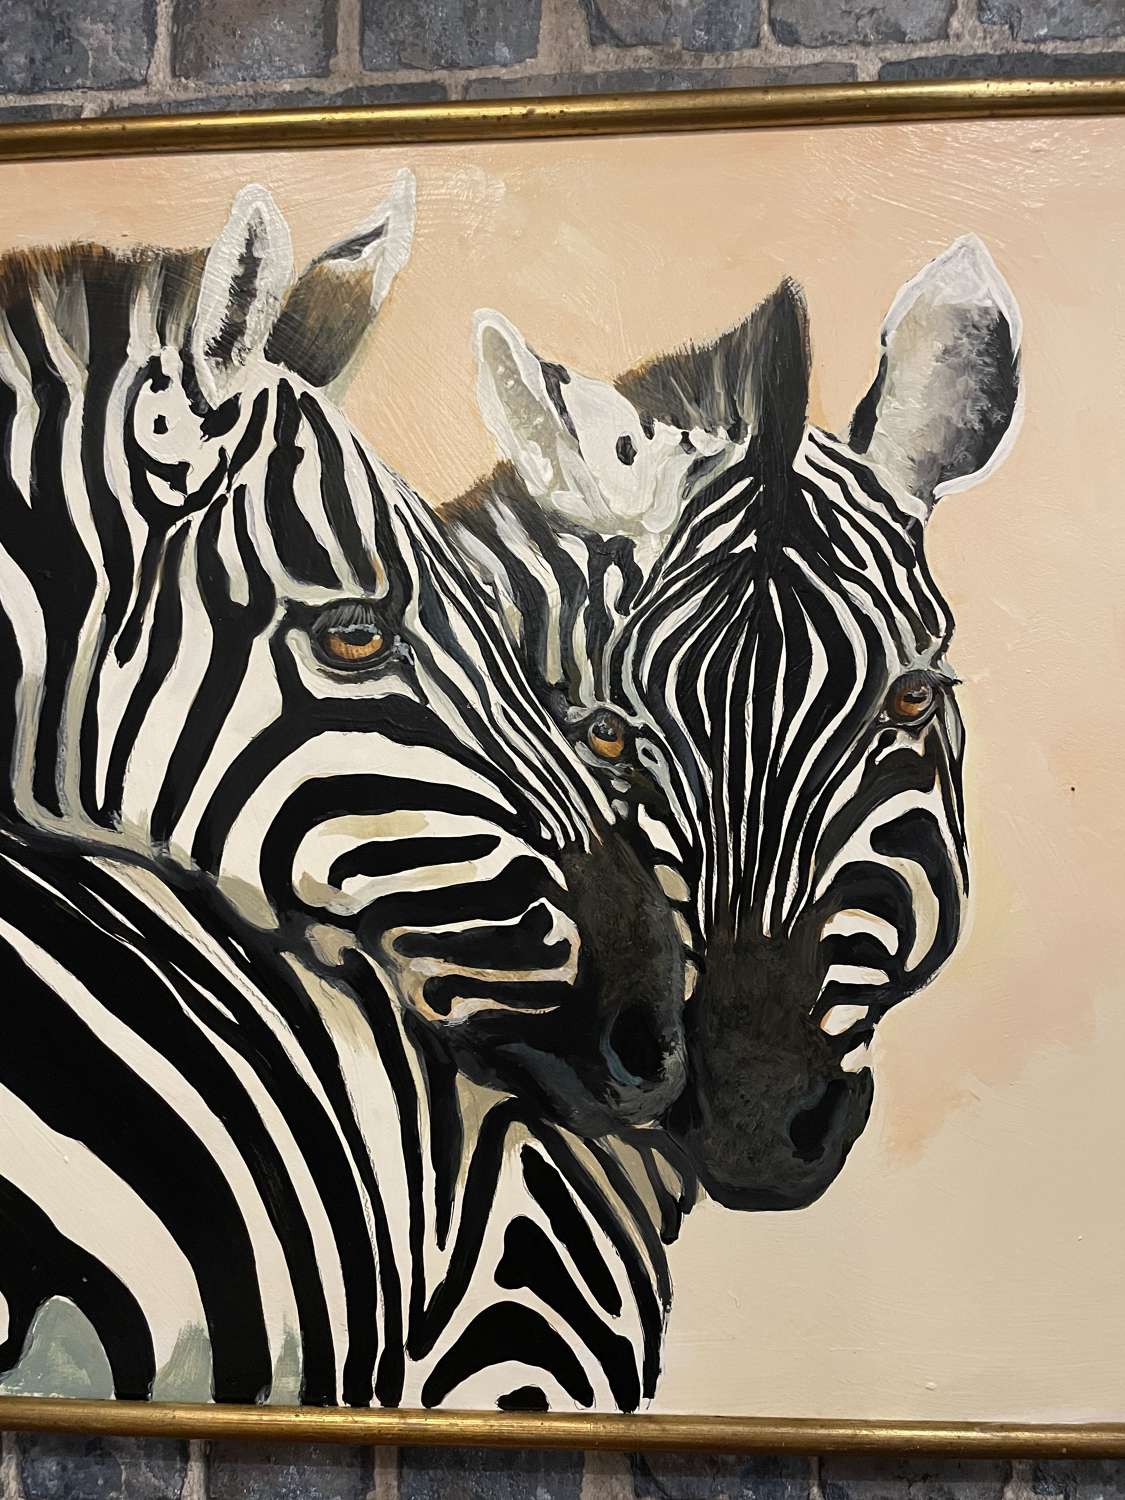 A signed painting of Zebrahs by C Fredriksson